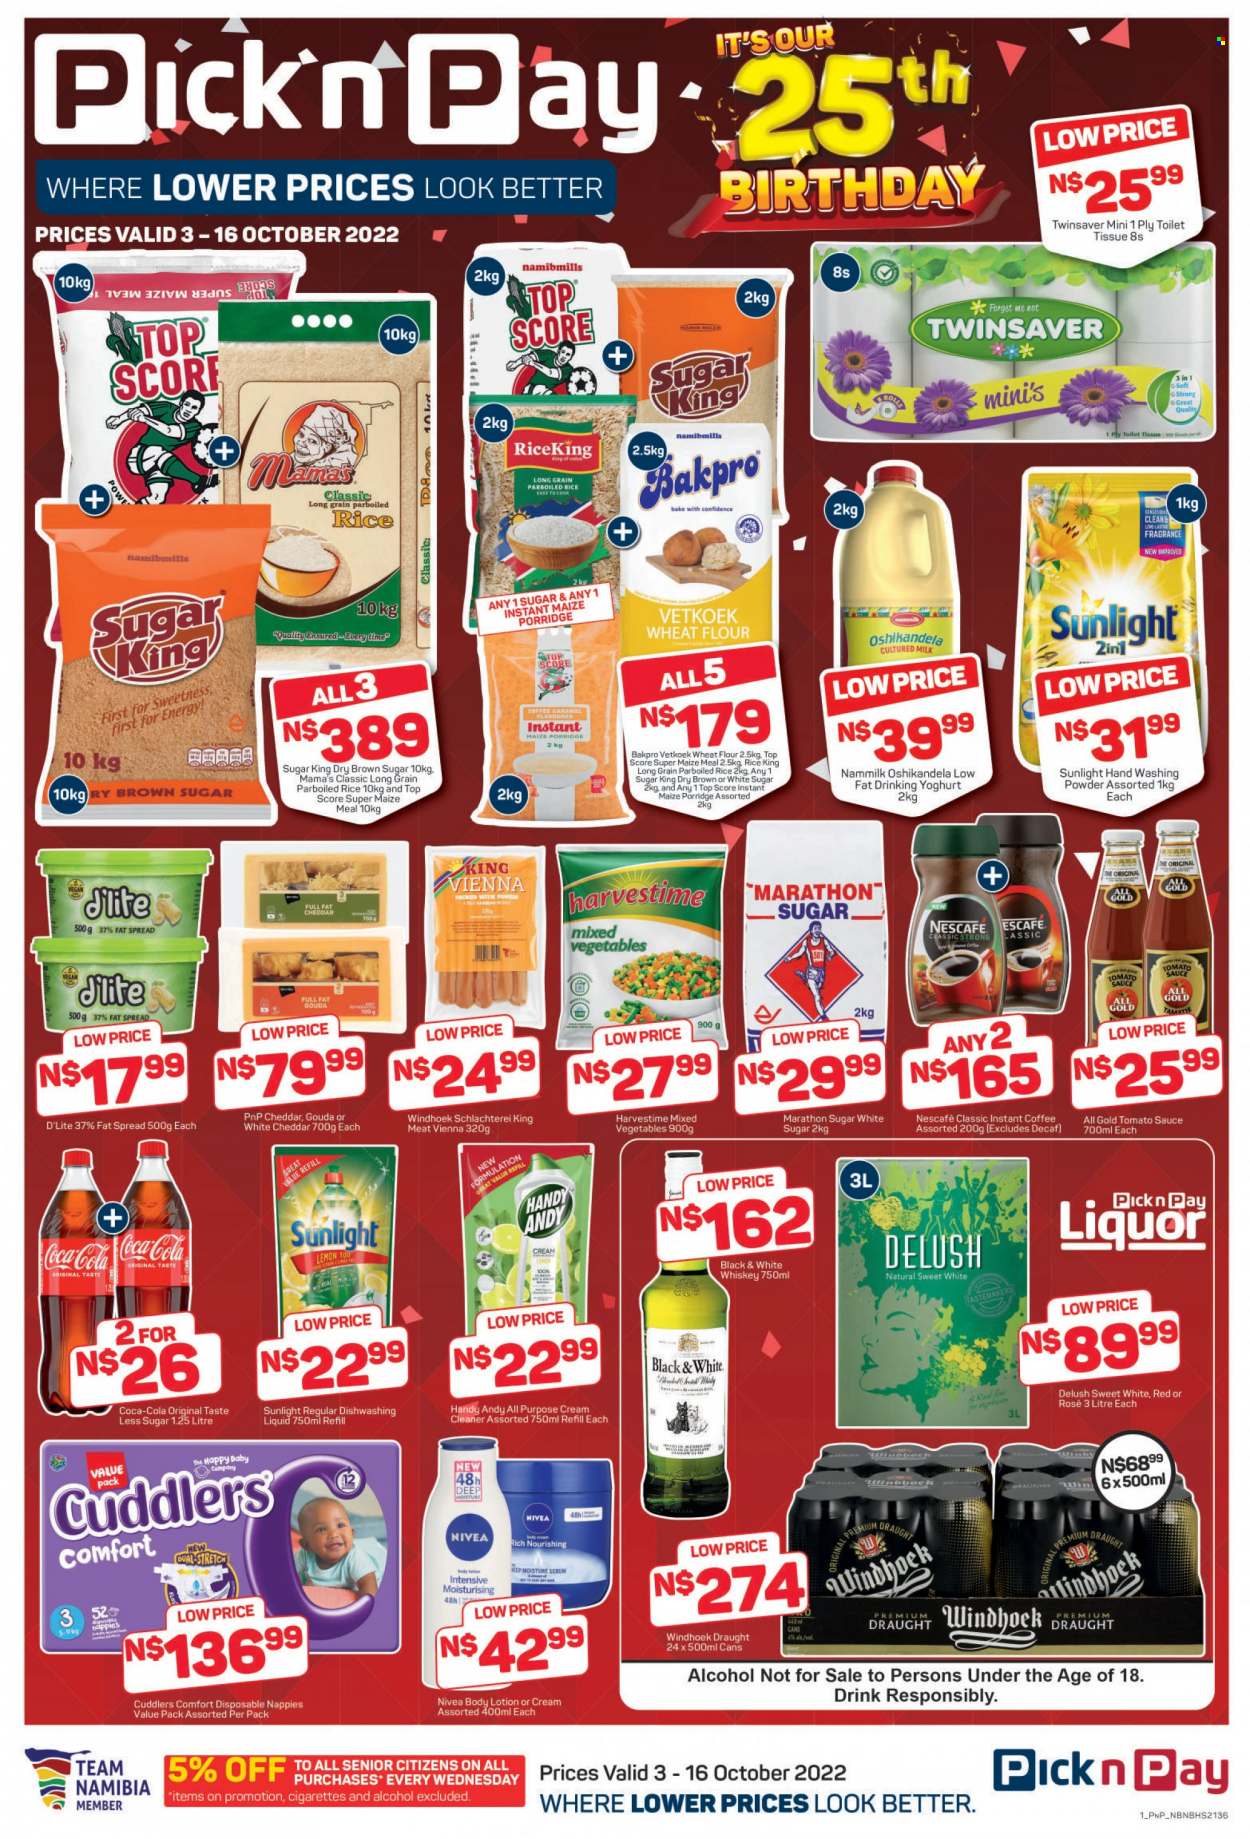 thumbnail - Pick n Pay catalogue  - 03/10/2022 - 16/10/2022 - Sales products - sauce, Mama's, gouda, cheddar, cheese, yoghurt, milk, yoghurt drink, fat spread, mixed vegetables, Harvestime, toffee, cane sugar, flour, wheat flour, maize meal, tomato sauce, porridge, rice, parboiled rice, Coca-Cola, instant coffee, Nescafé, alcohol, rosé wine, whiskey, liquor, whisky, Sol, nappies, cream cleaner, cleaner, laundry powder, Sunlight, dishwashing liquid, Nivea, serum, body lotion. Page 2.